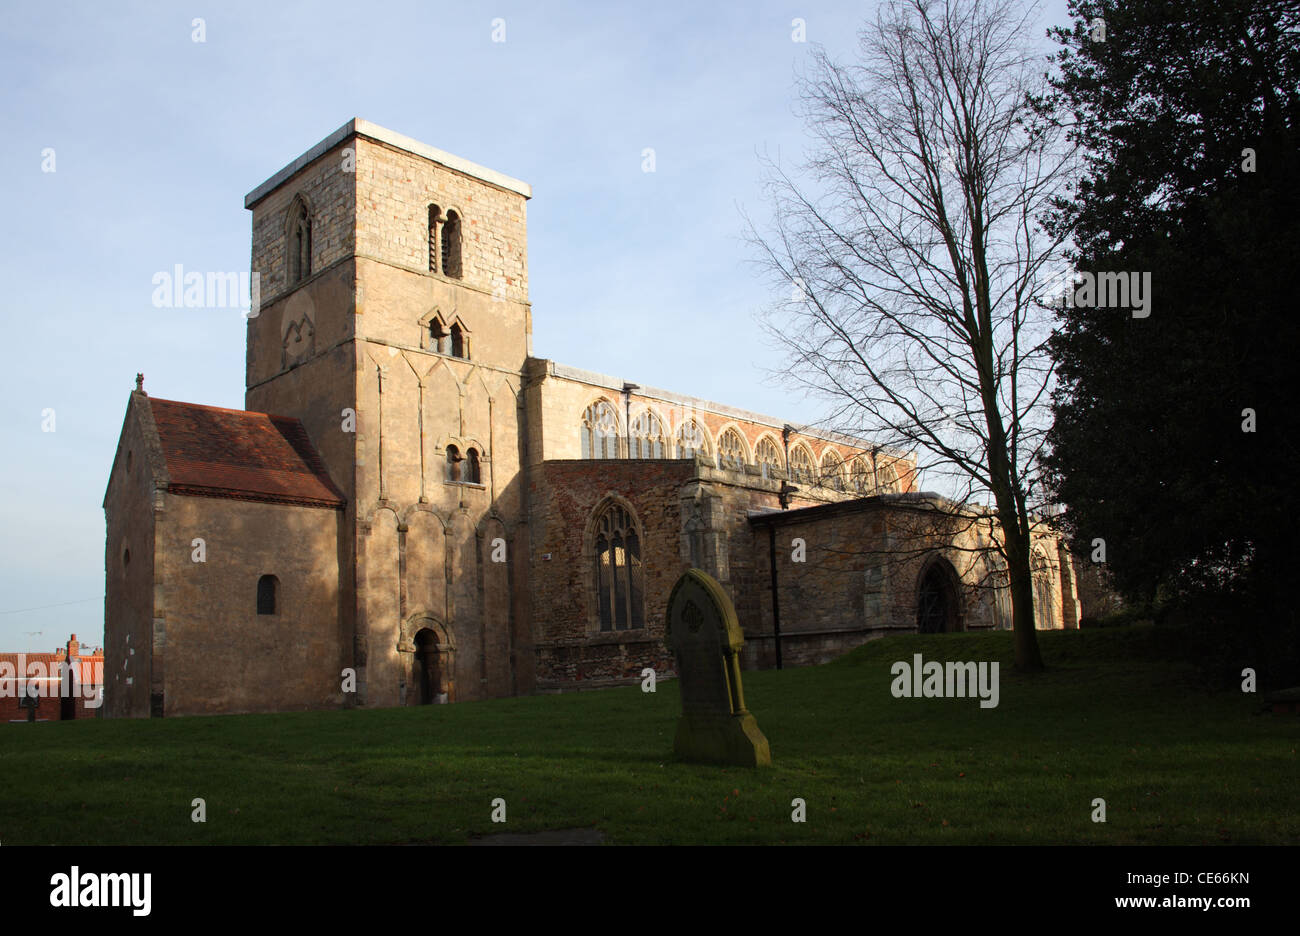 St Peter's Church, Barton Upon Humber, Lincolnshire, 10th Century Tower. Stock Photo